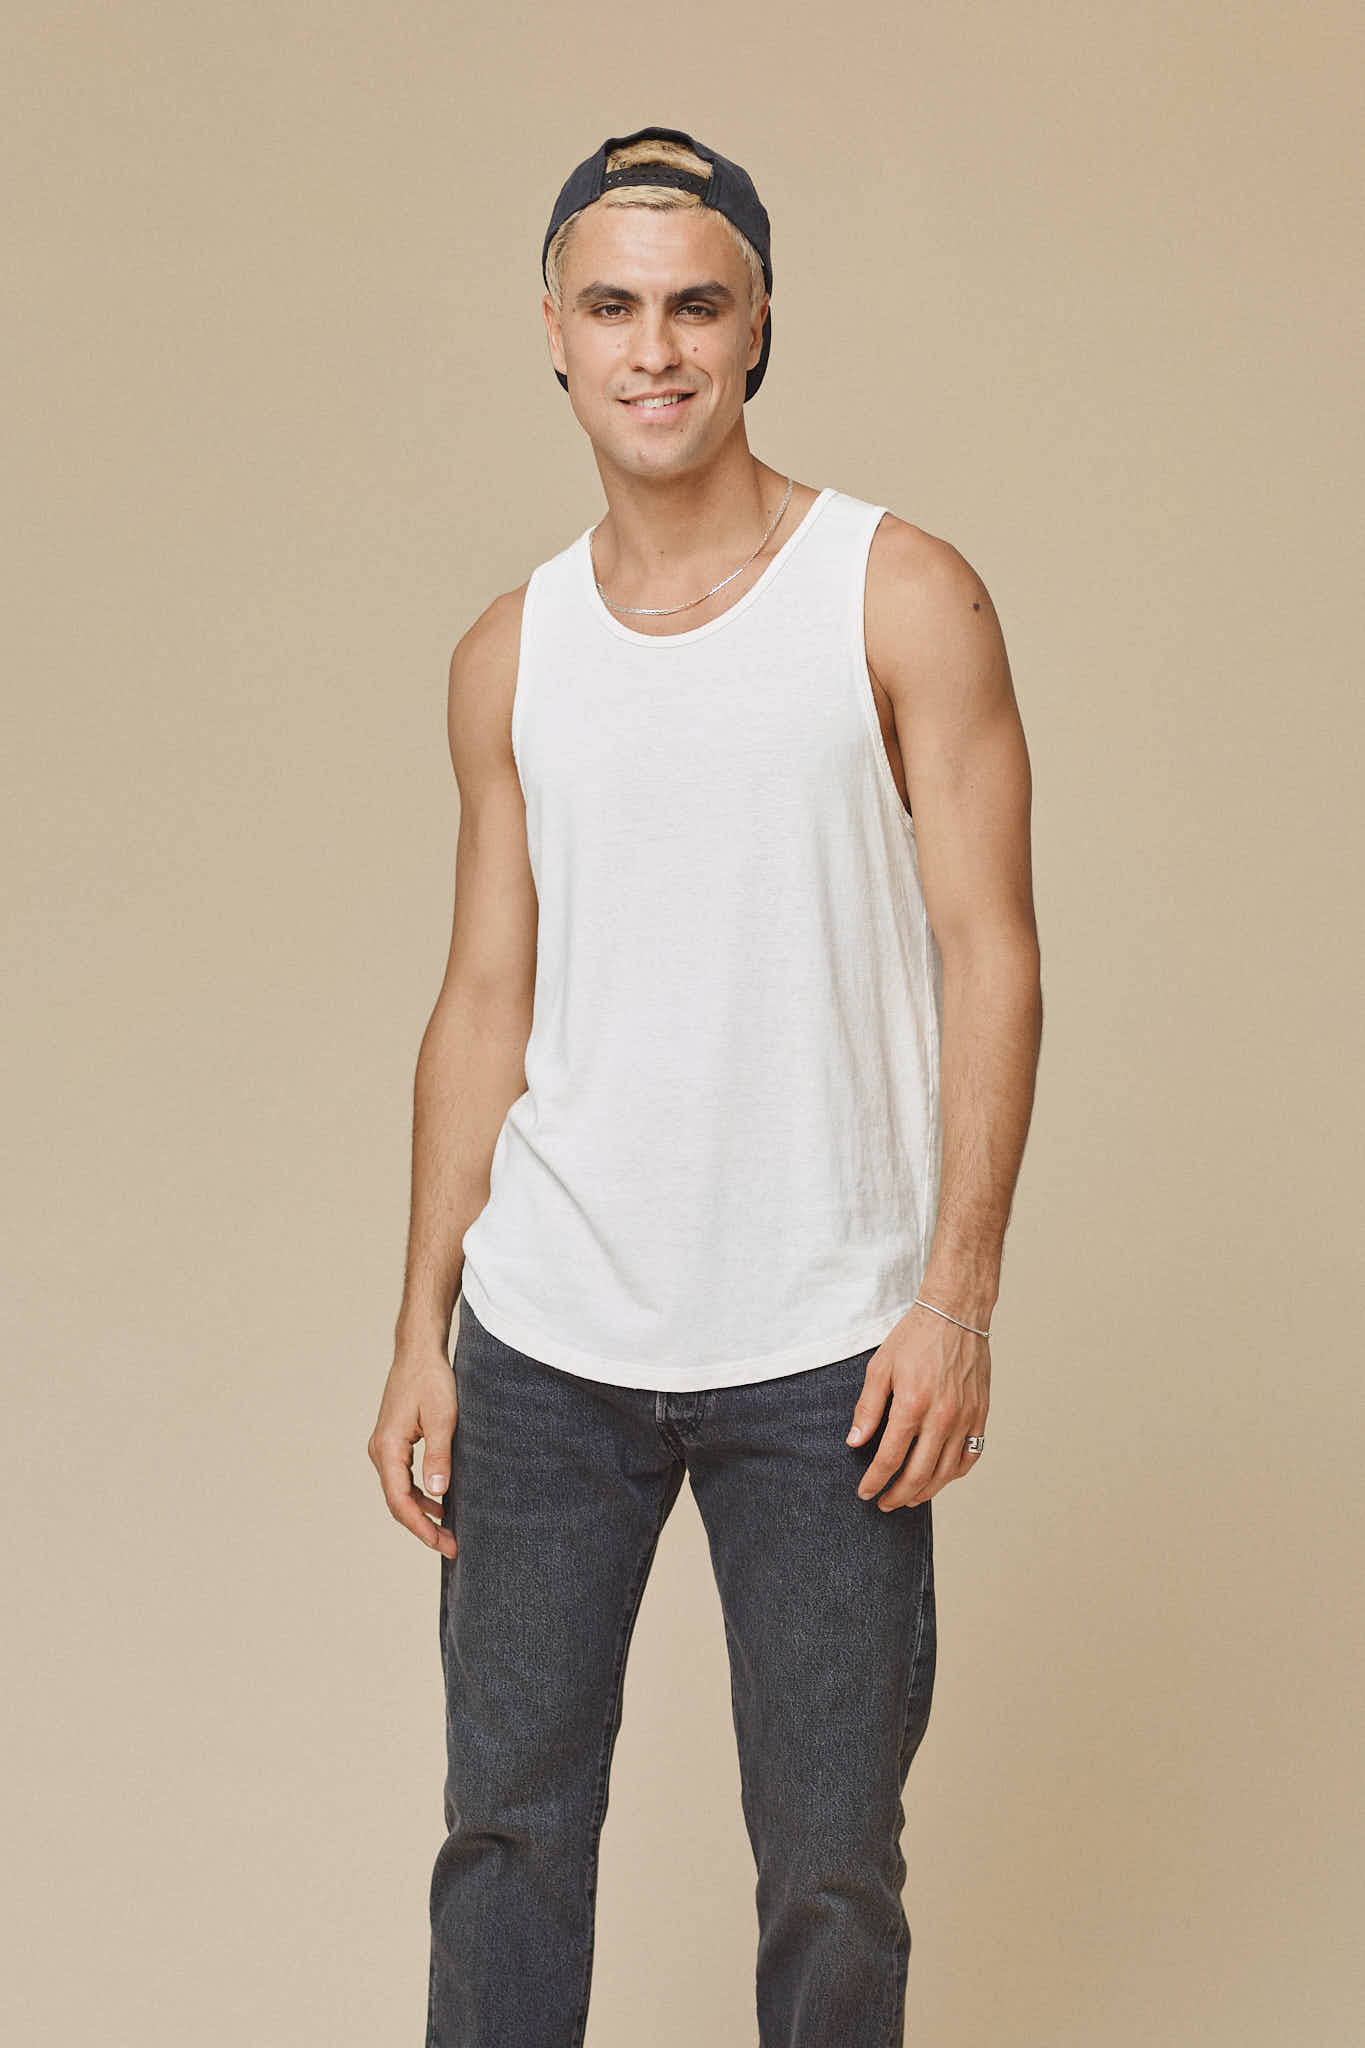 Royalty-Free photo: Man wearing white tank top and black fitted pants